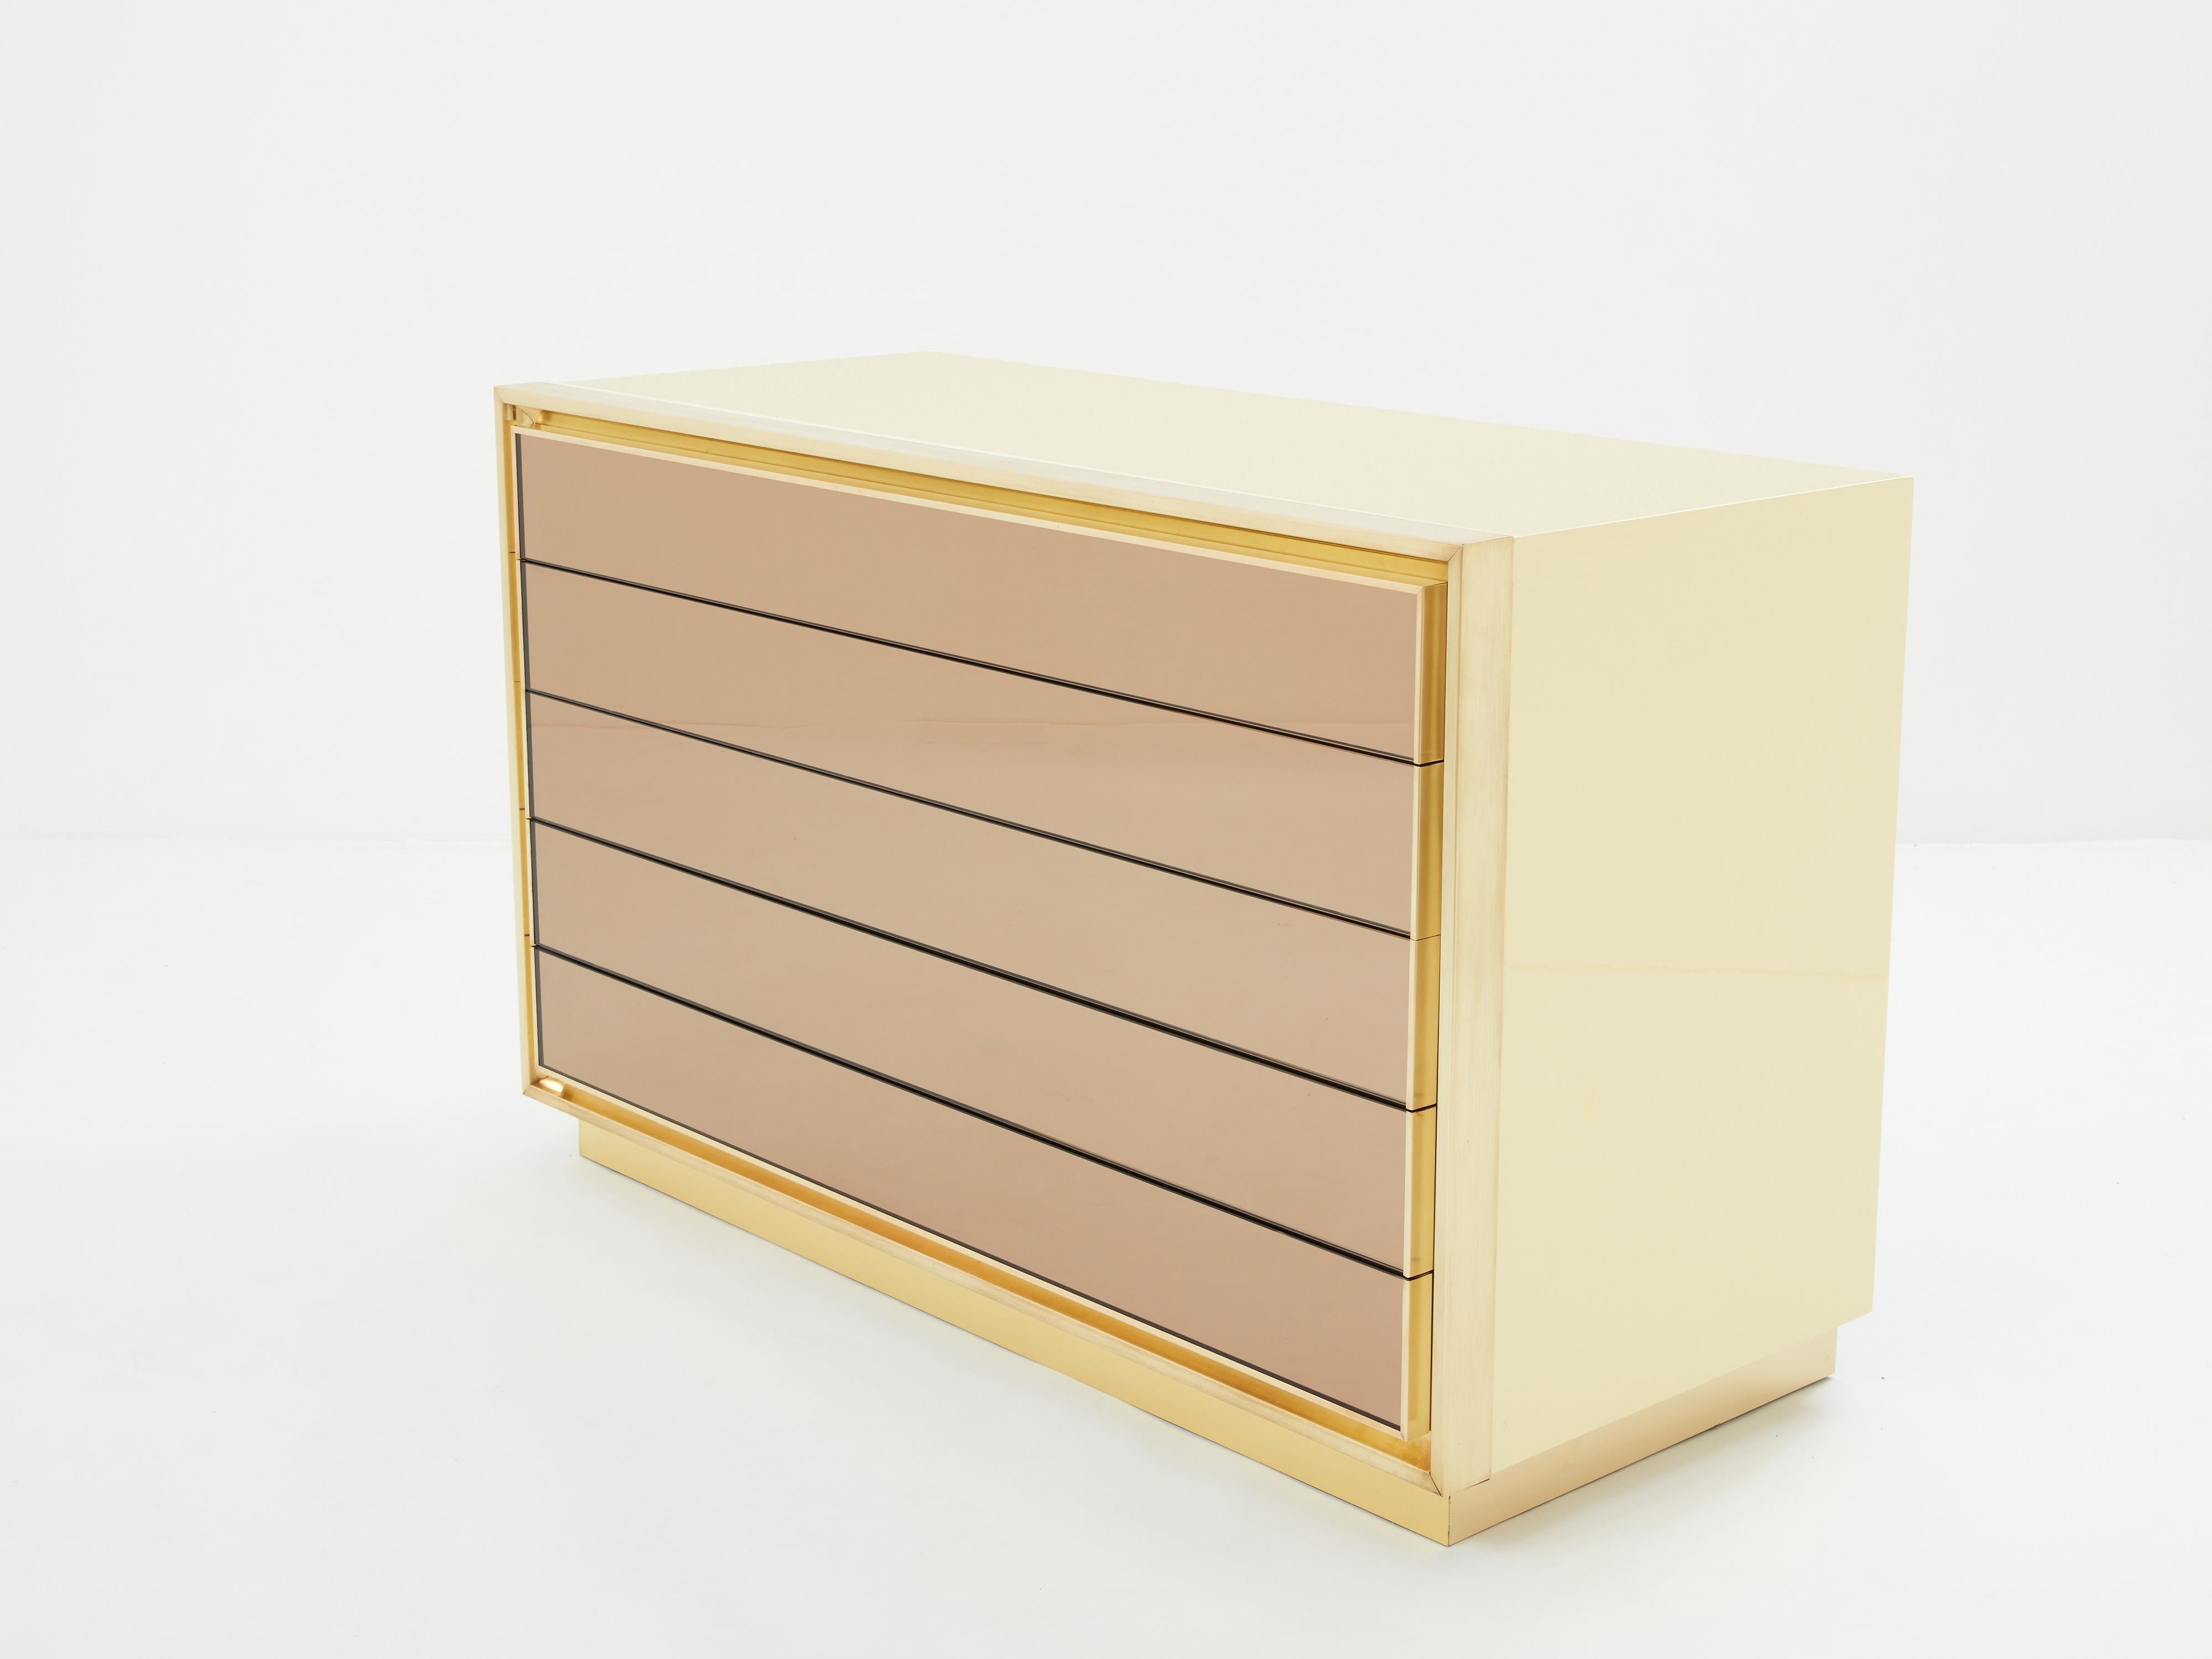 This rare Maison Jasen five drawers, cream lacquered chest of drawers would be stunning in any bedroom or living room. Made to order by Maison Jansen in France in the late 1970s, the soft cream lacquer paired with brushed brass frames all around the